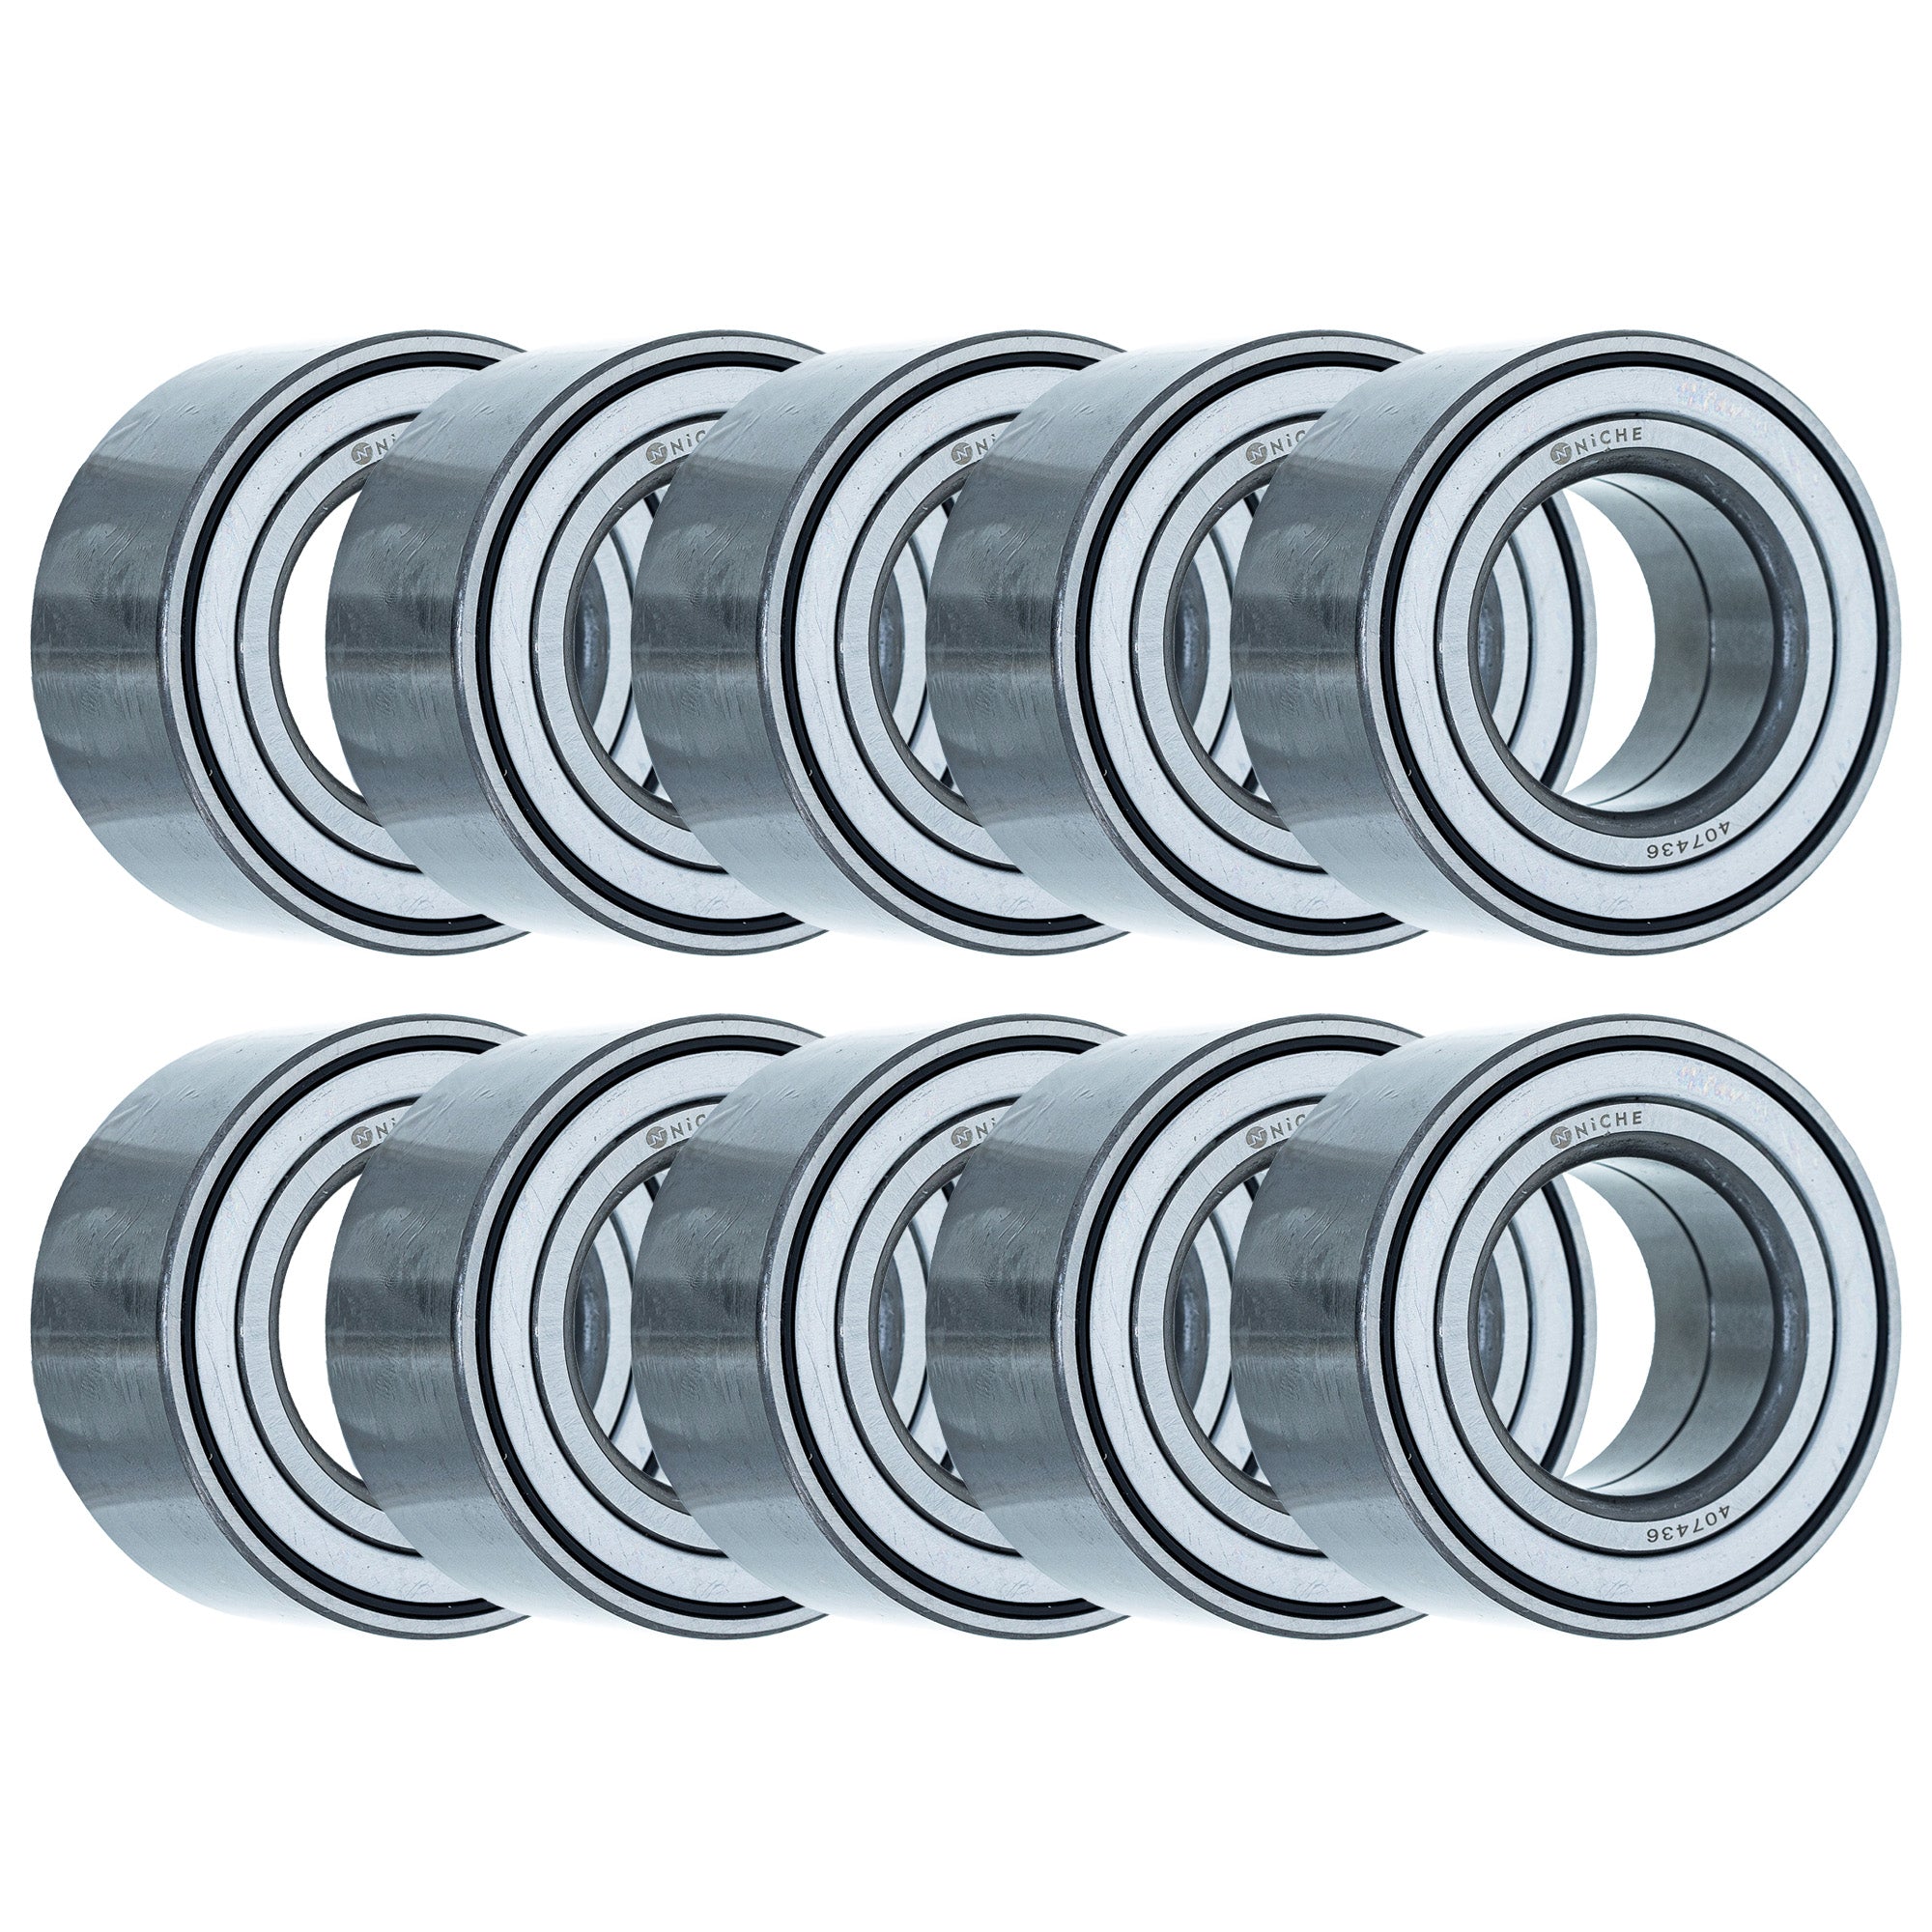 Double Row, Angular Contact, Ball Bearing Pack of 10 10-Pack for zOTHER NICHE 519-CBB2291R